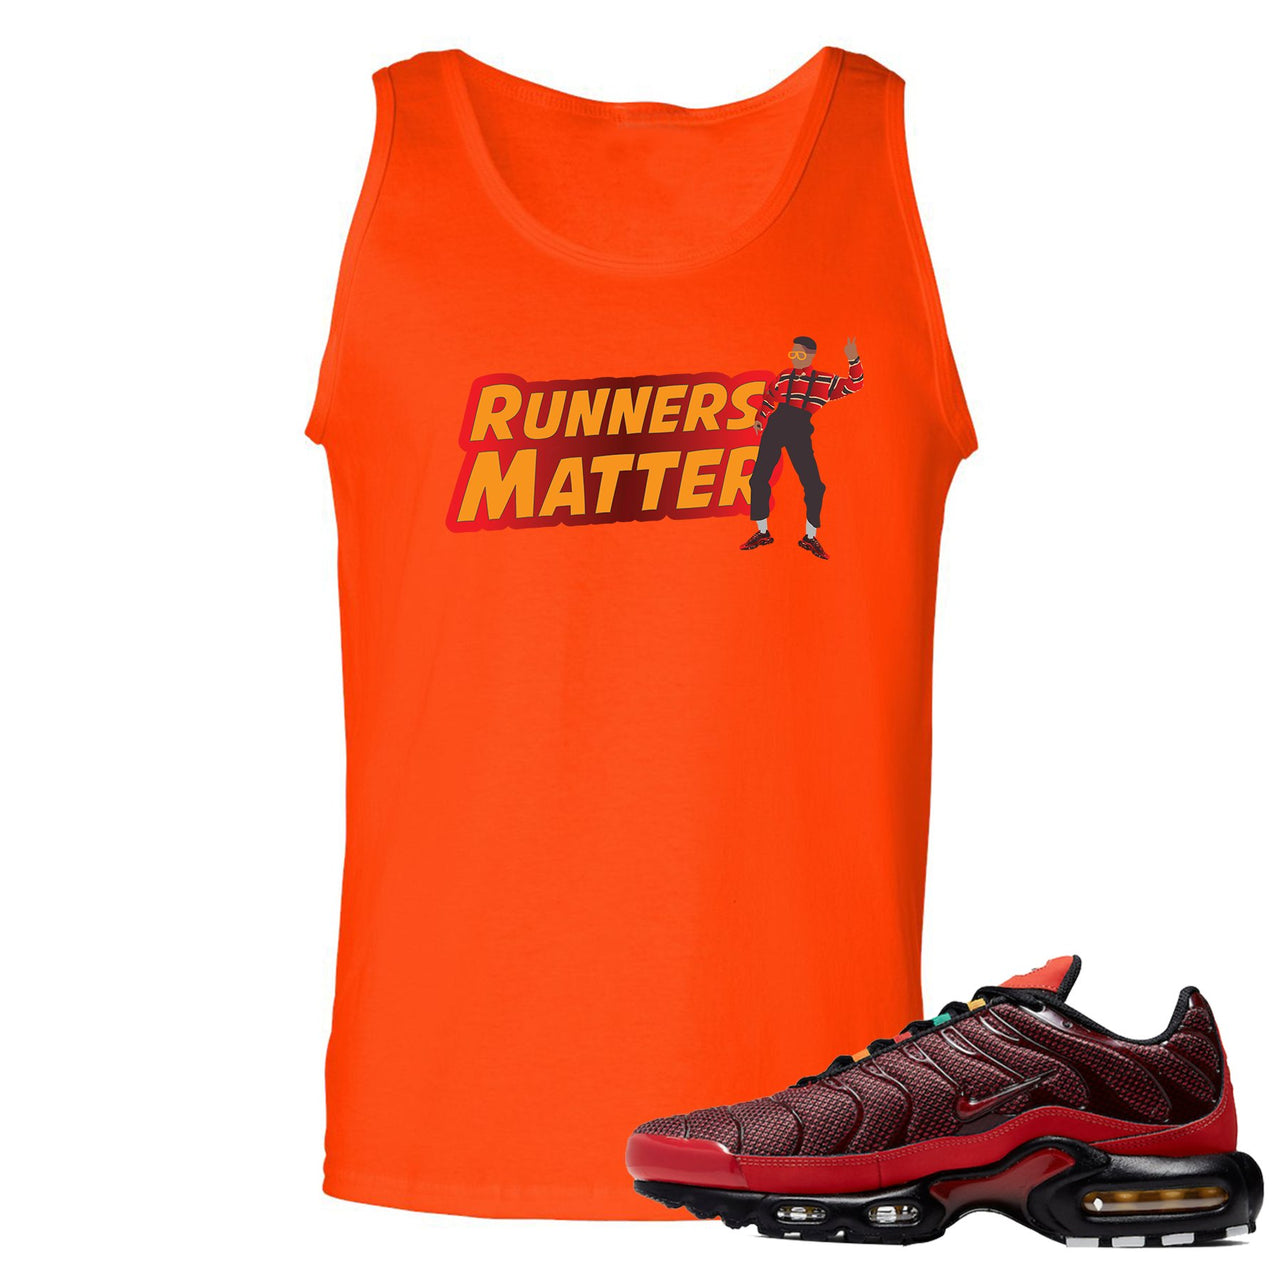 embroidered on the front of the air max plus sunburst sneaker matching orange tank top is the runners matter logo